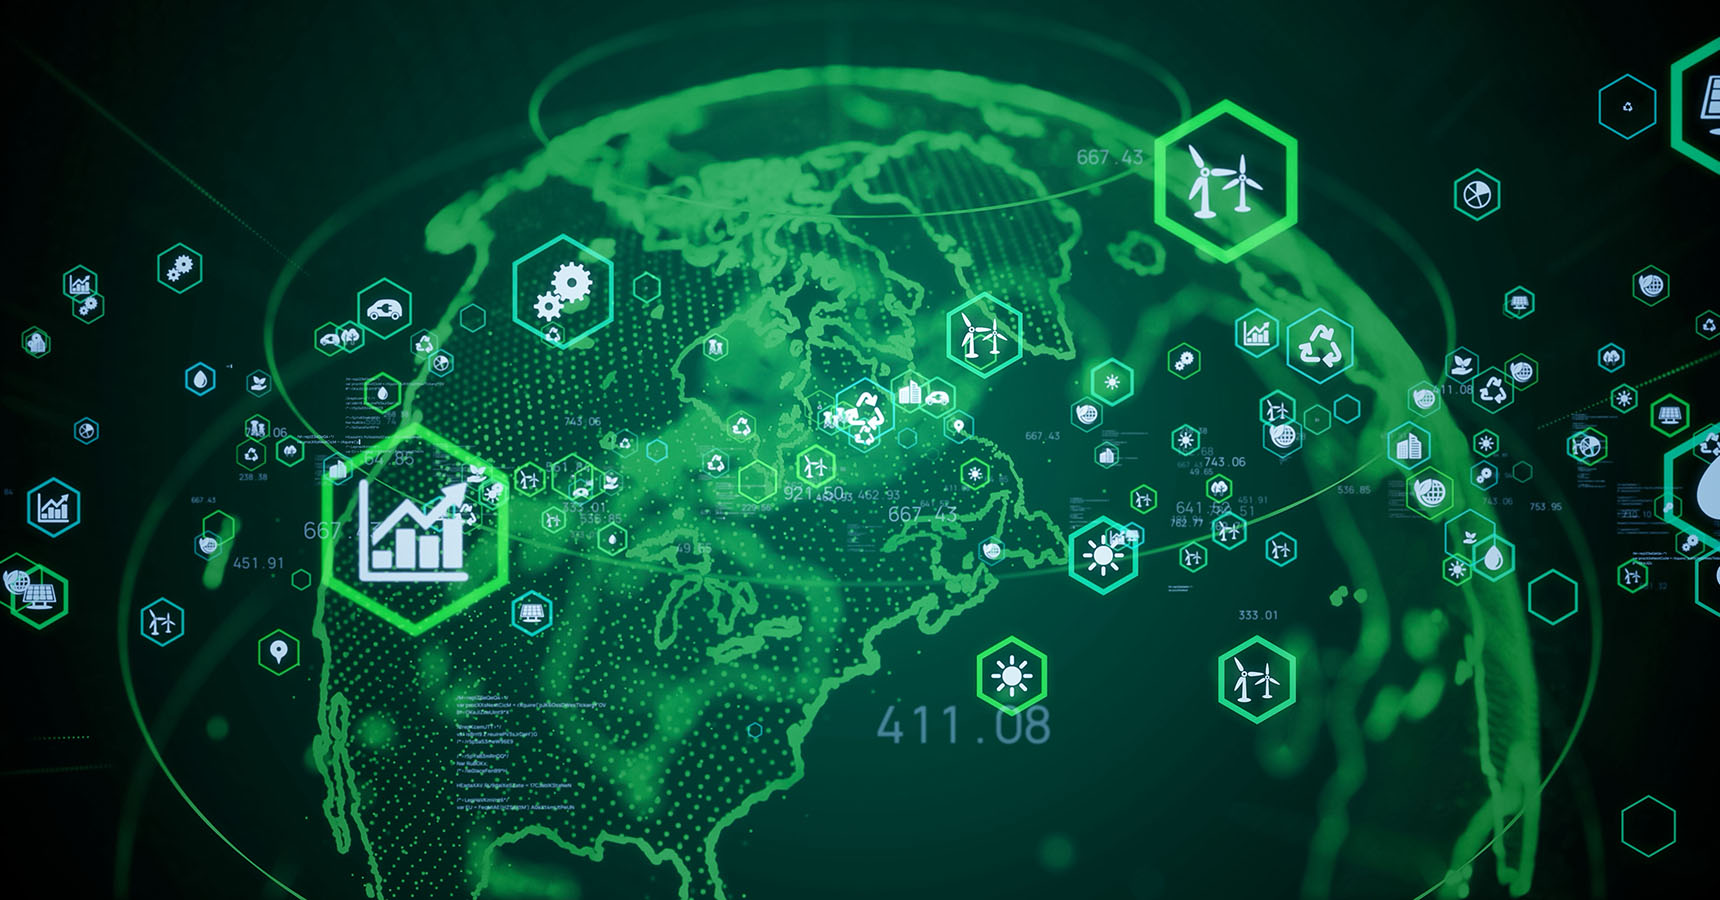 Digital illustration of the world outlined in green against a dark background, with various renewable energy icons and numbers floating around.